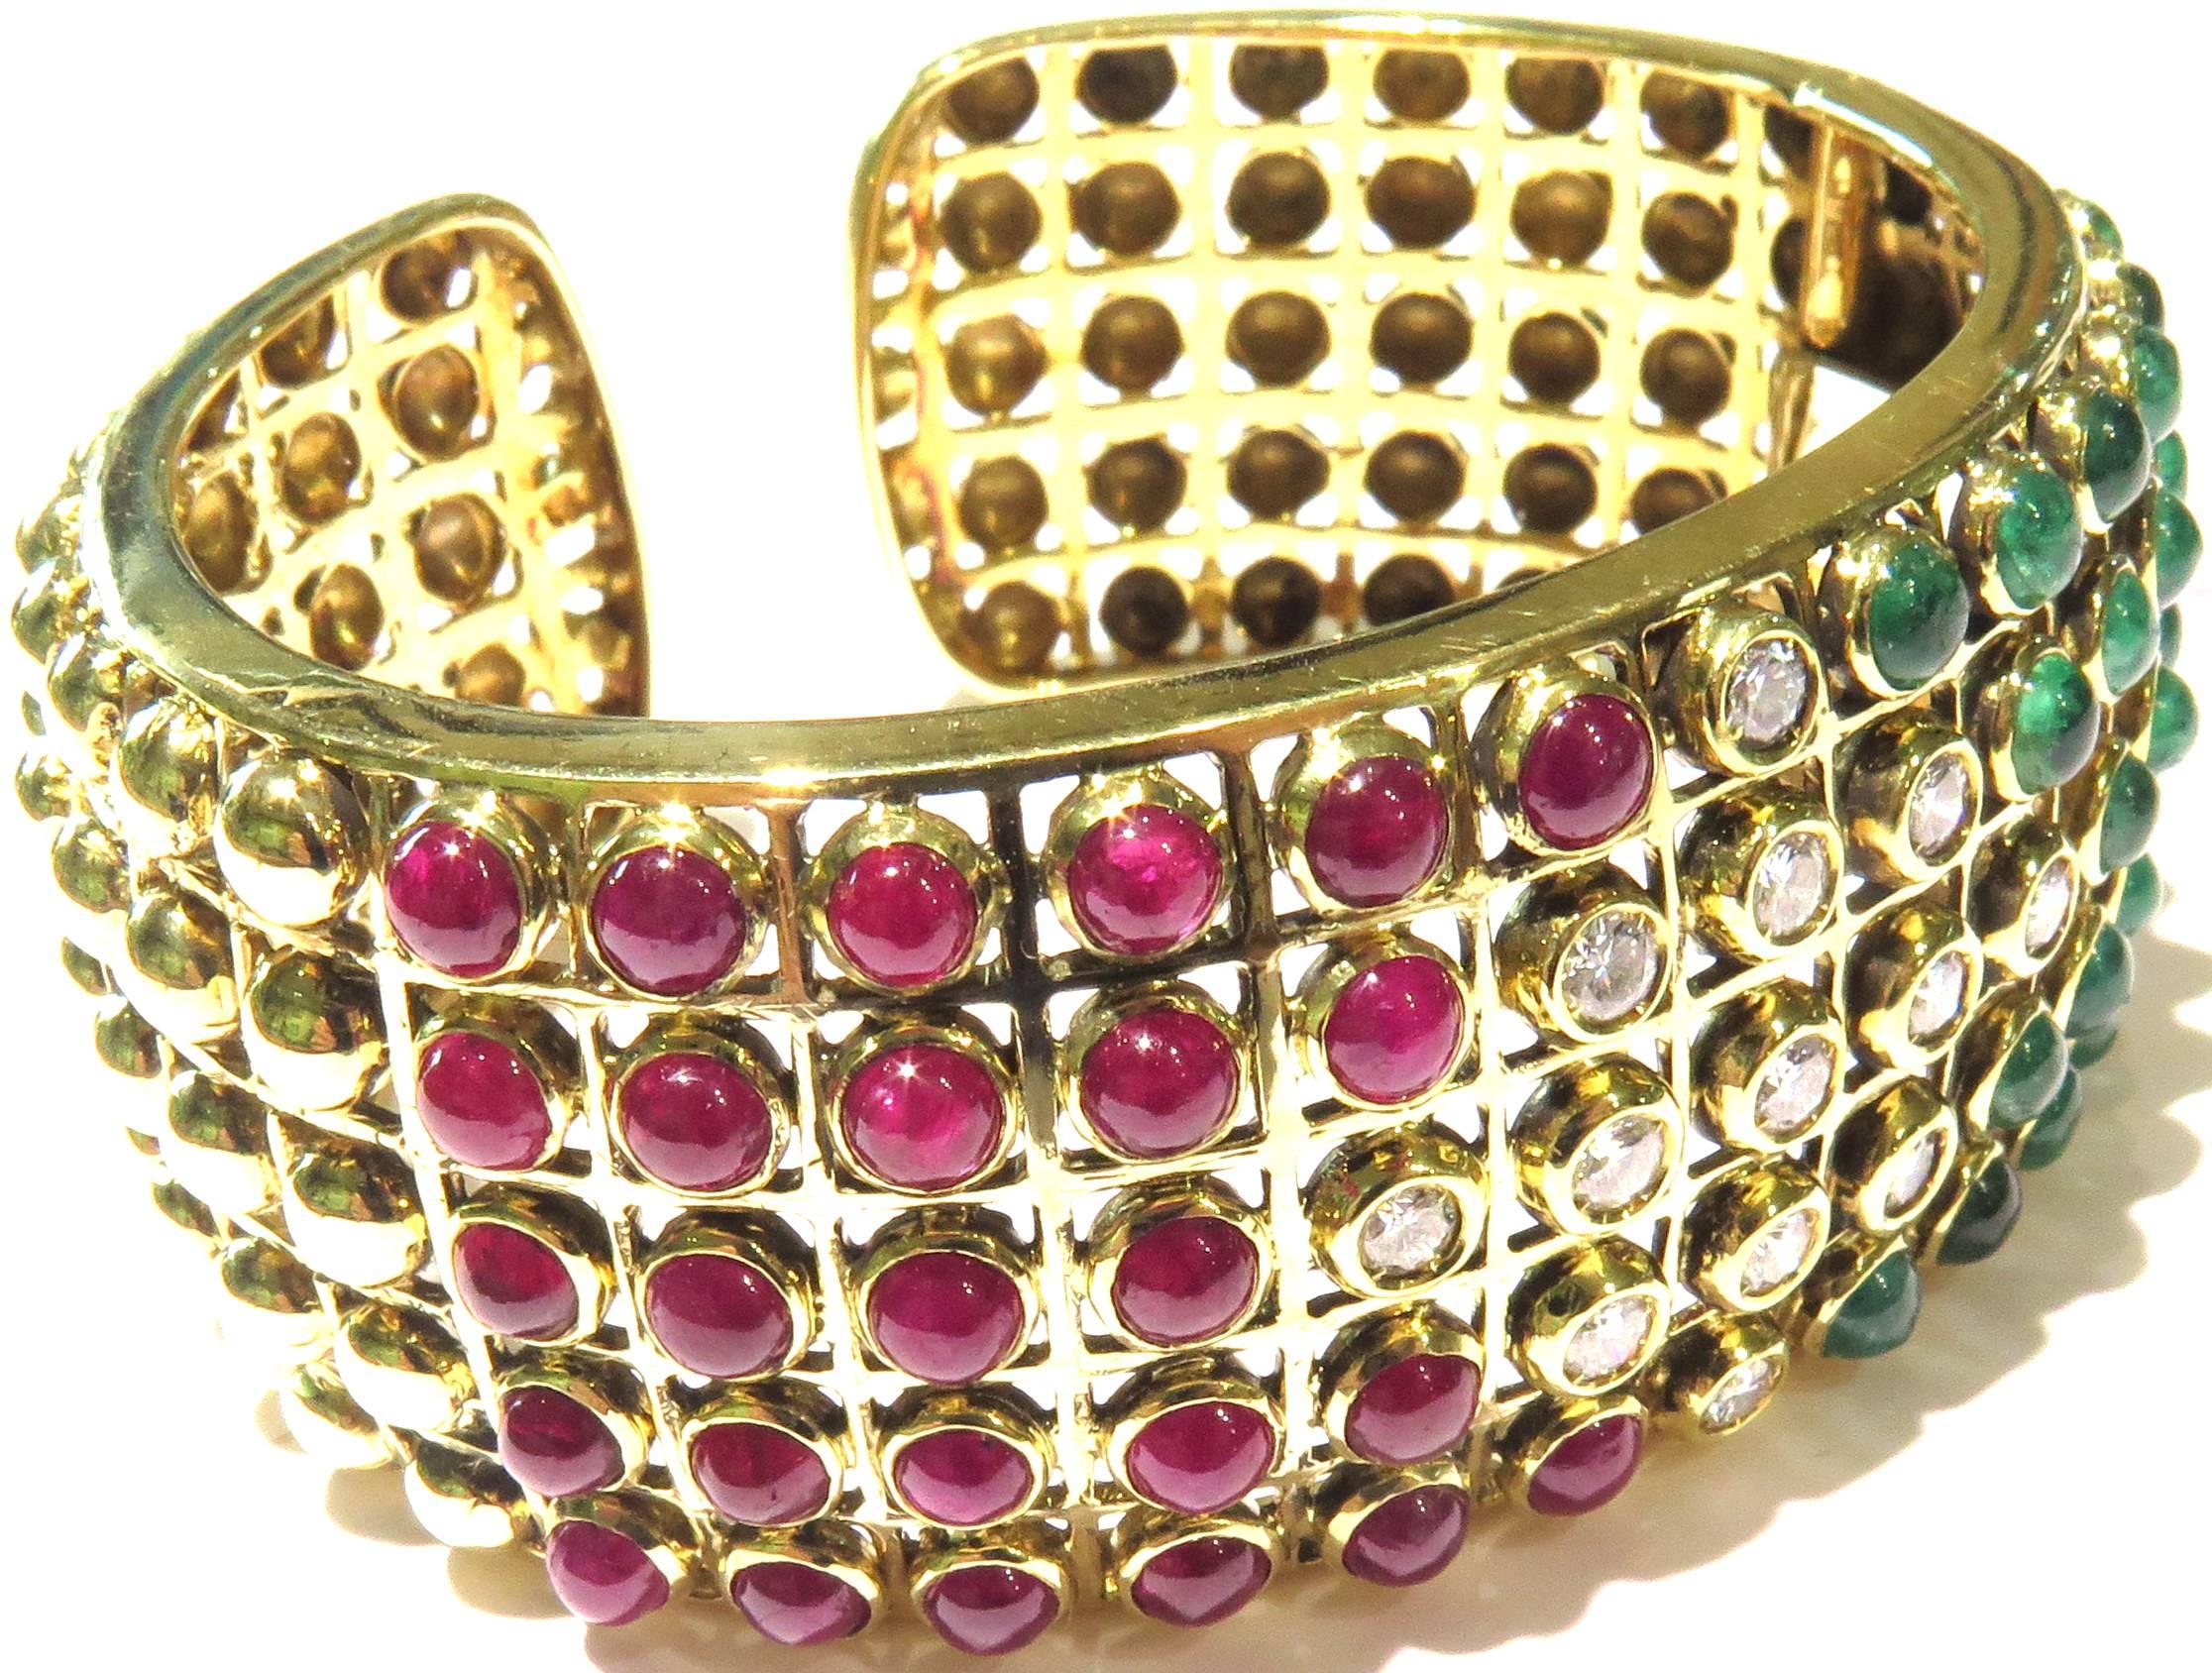 Very well made 18k bezel set diamonds, rubies, and emeralds wide hinged bangle bracelet. So easy to put on and take off.  Very comfortable on. This well made bracelet can be dressed up or down.
This bracelet weighs 74.6 grams
This bracelet is 1